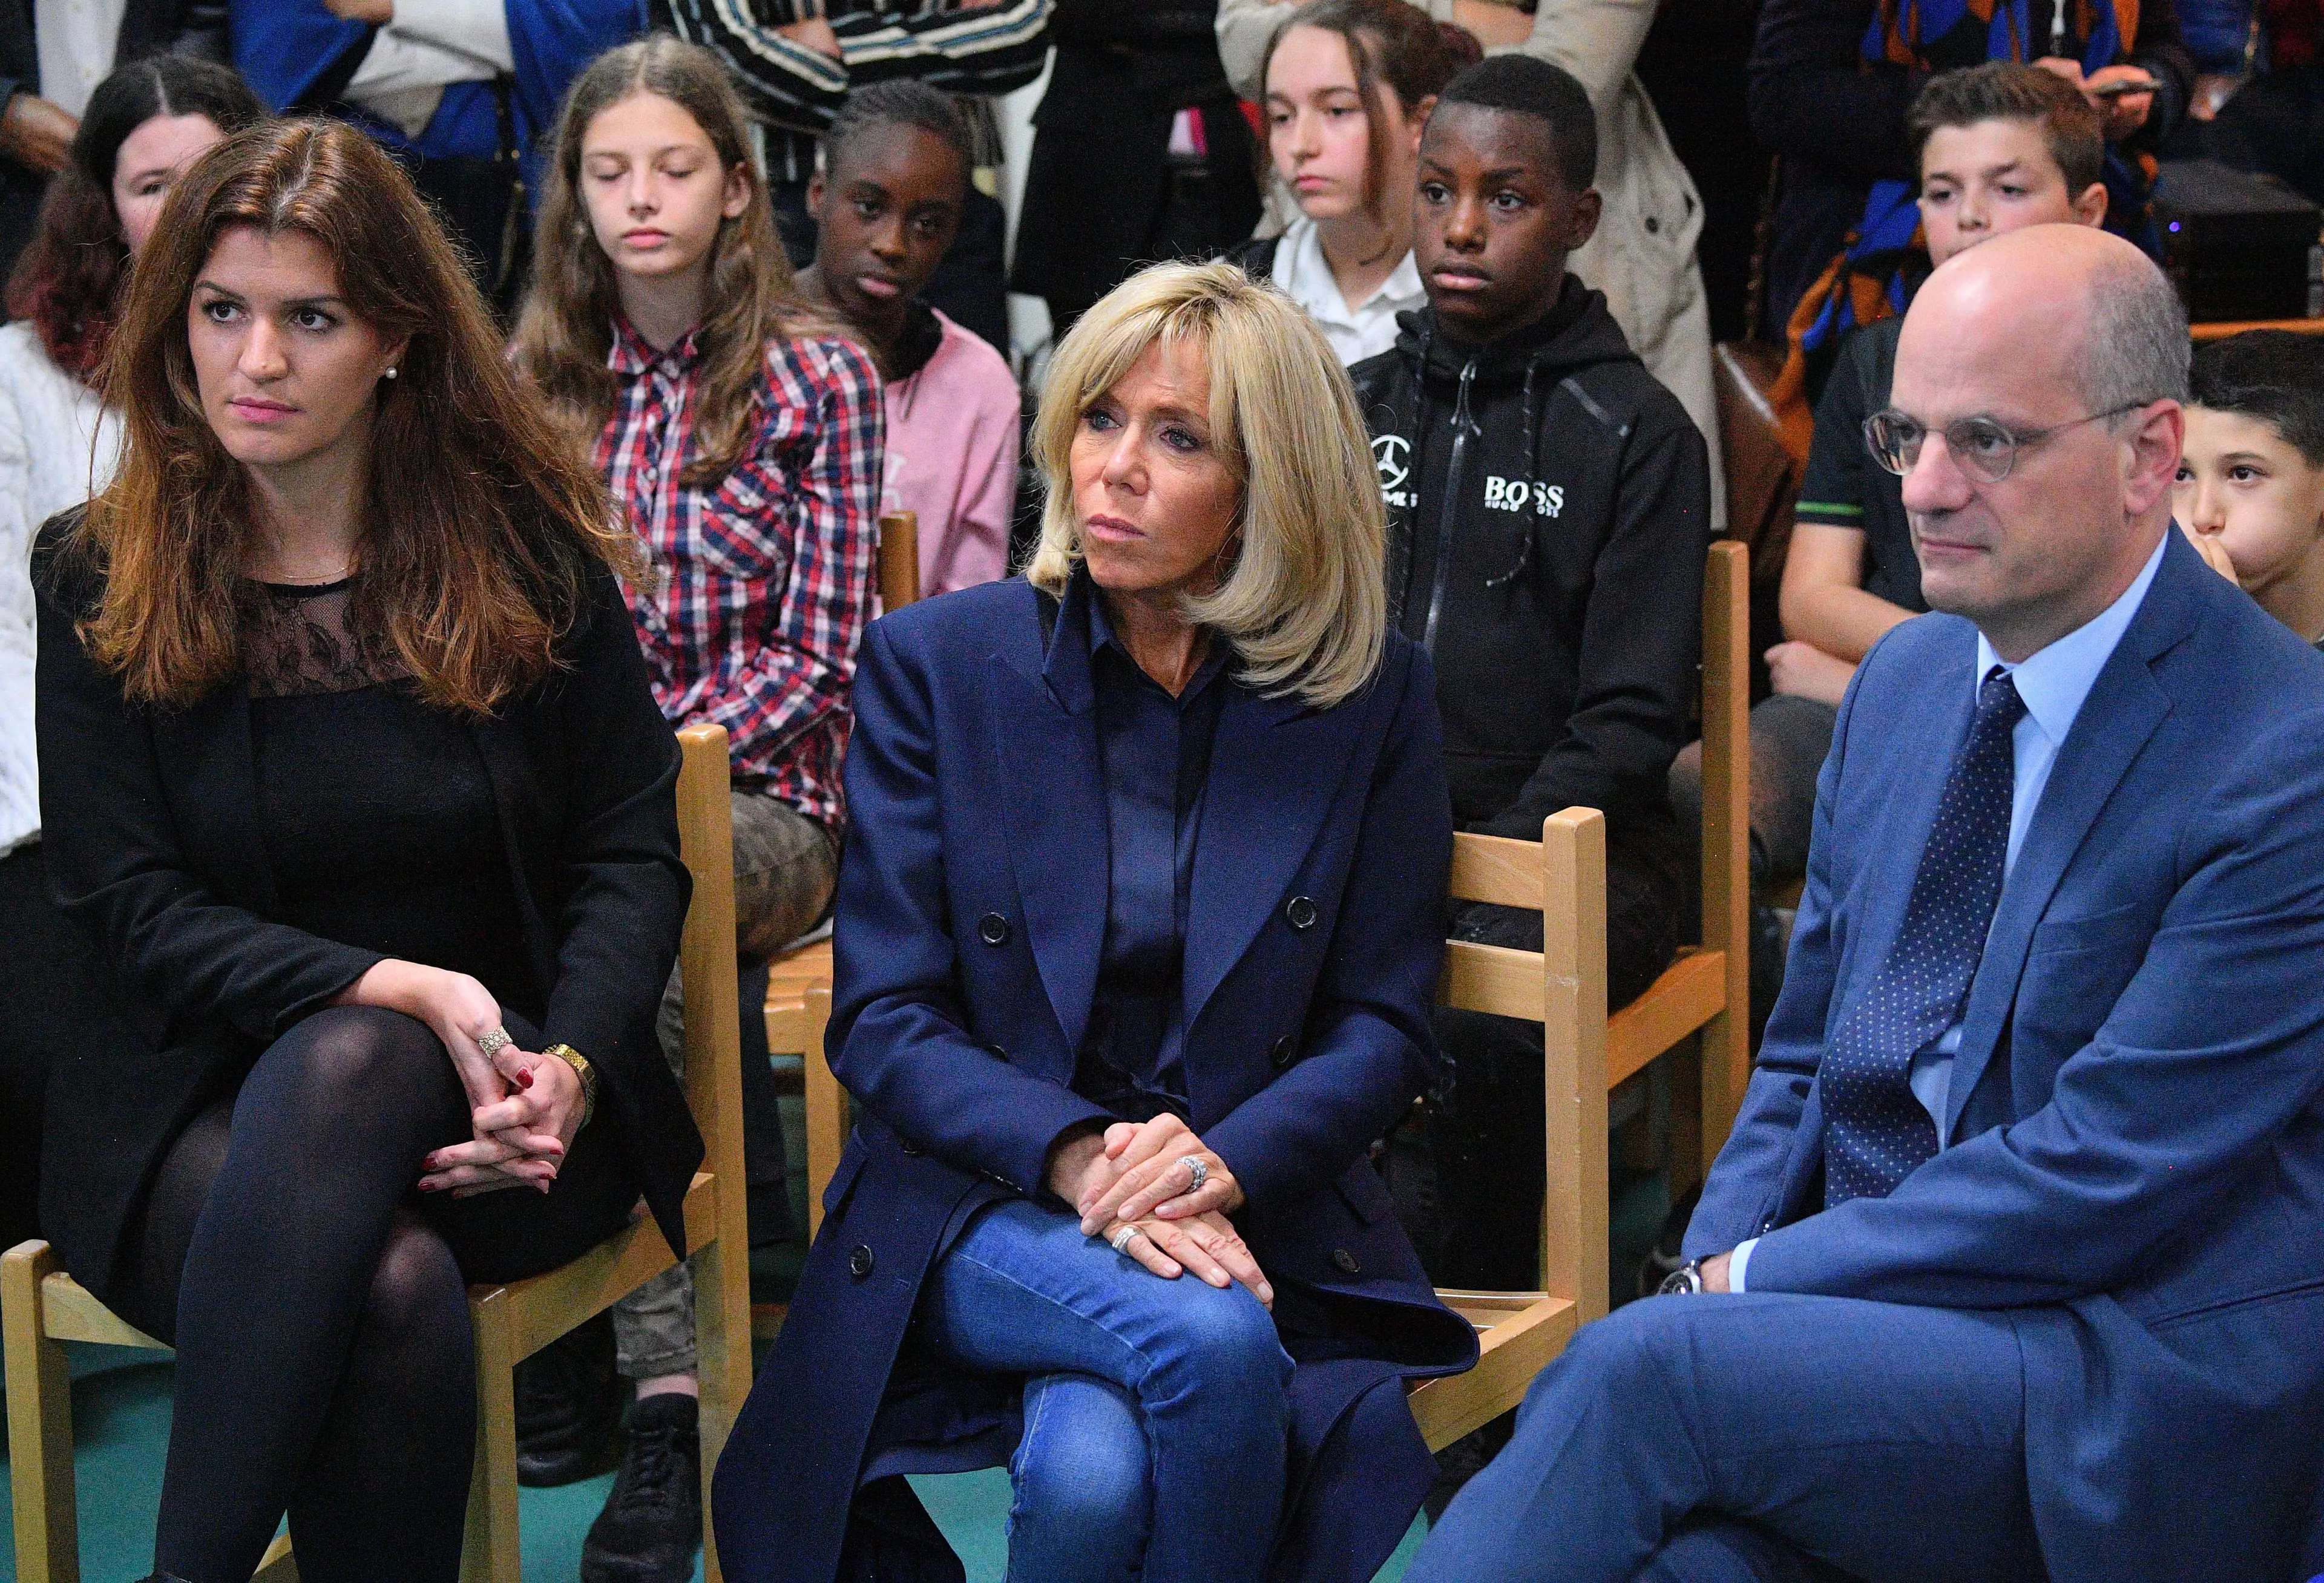 French Education Minister Jean-Michel Blanquer and the French President's wife Brigitte Macron have focused on eradicating bullying in the country. Credit:Abaca Press / Alamy Stock Photo